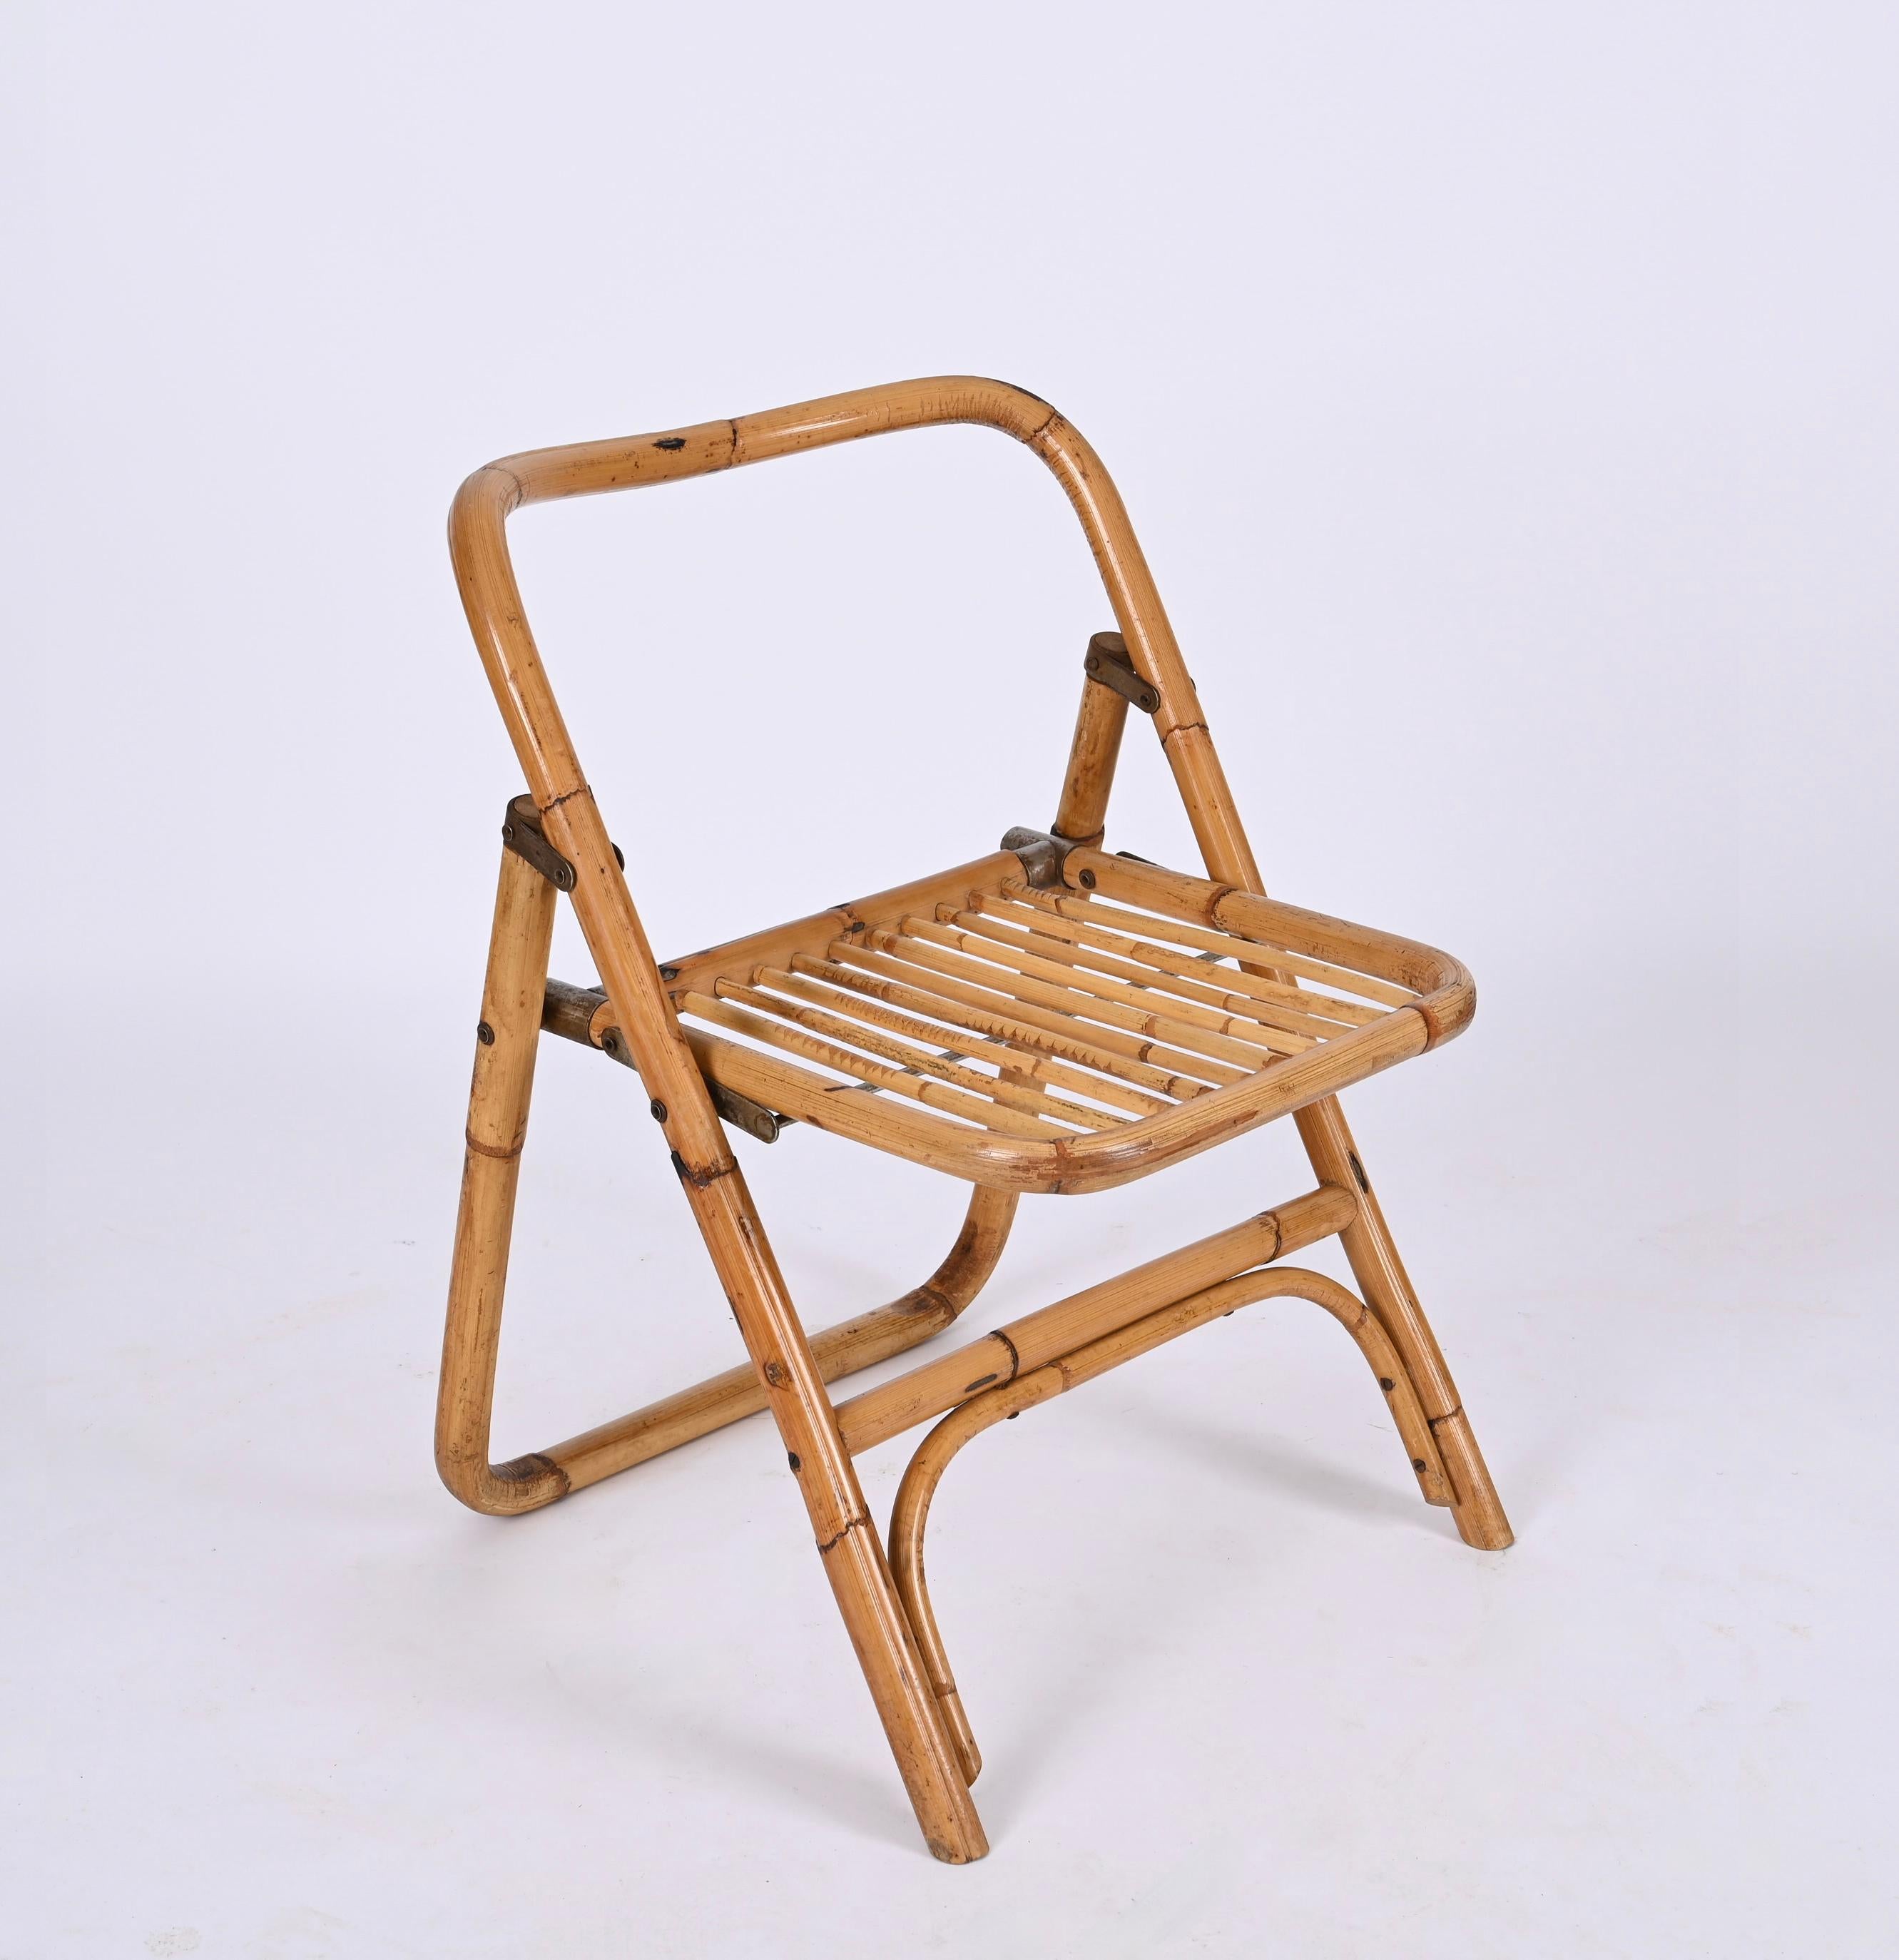 Dal Vera Bamboo Folding Chairs, Italy, 1960s For Sale 5